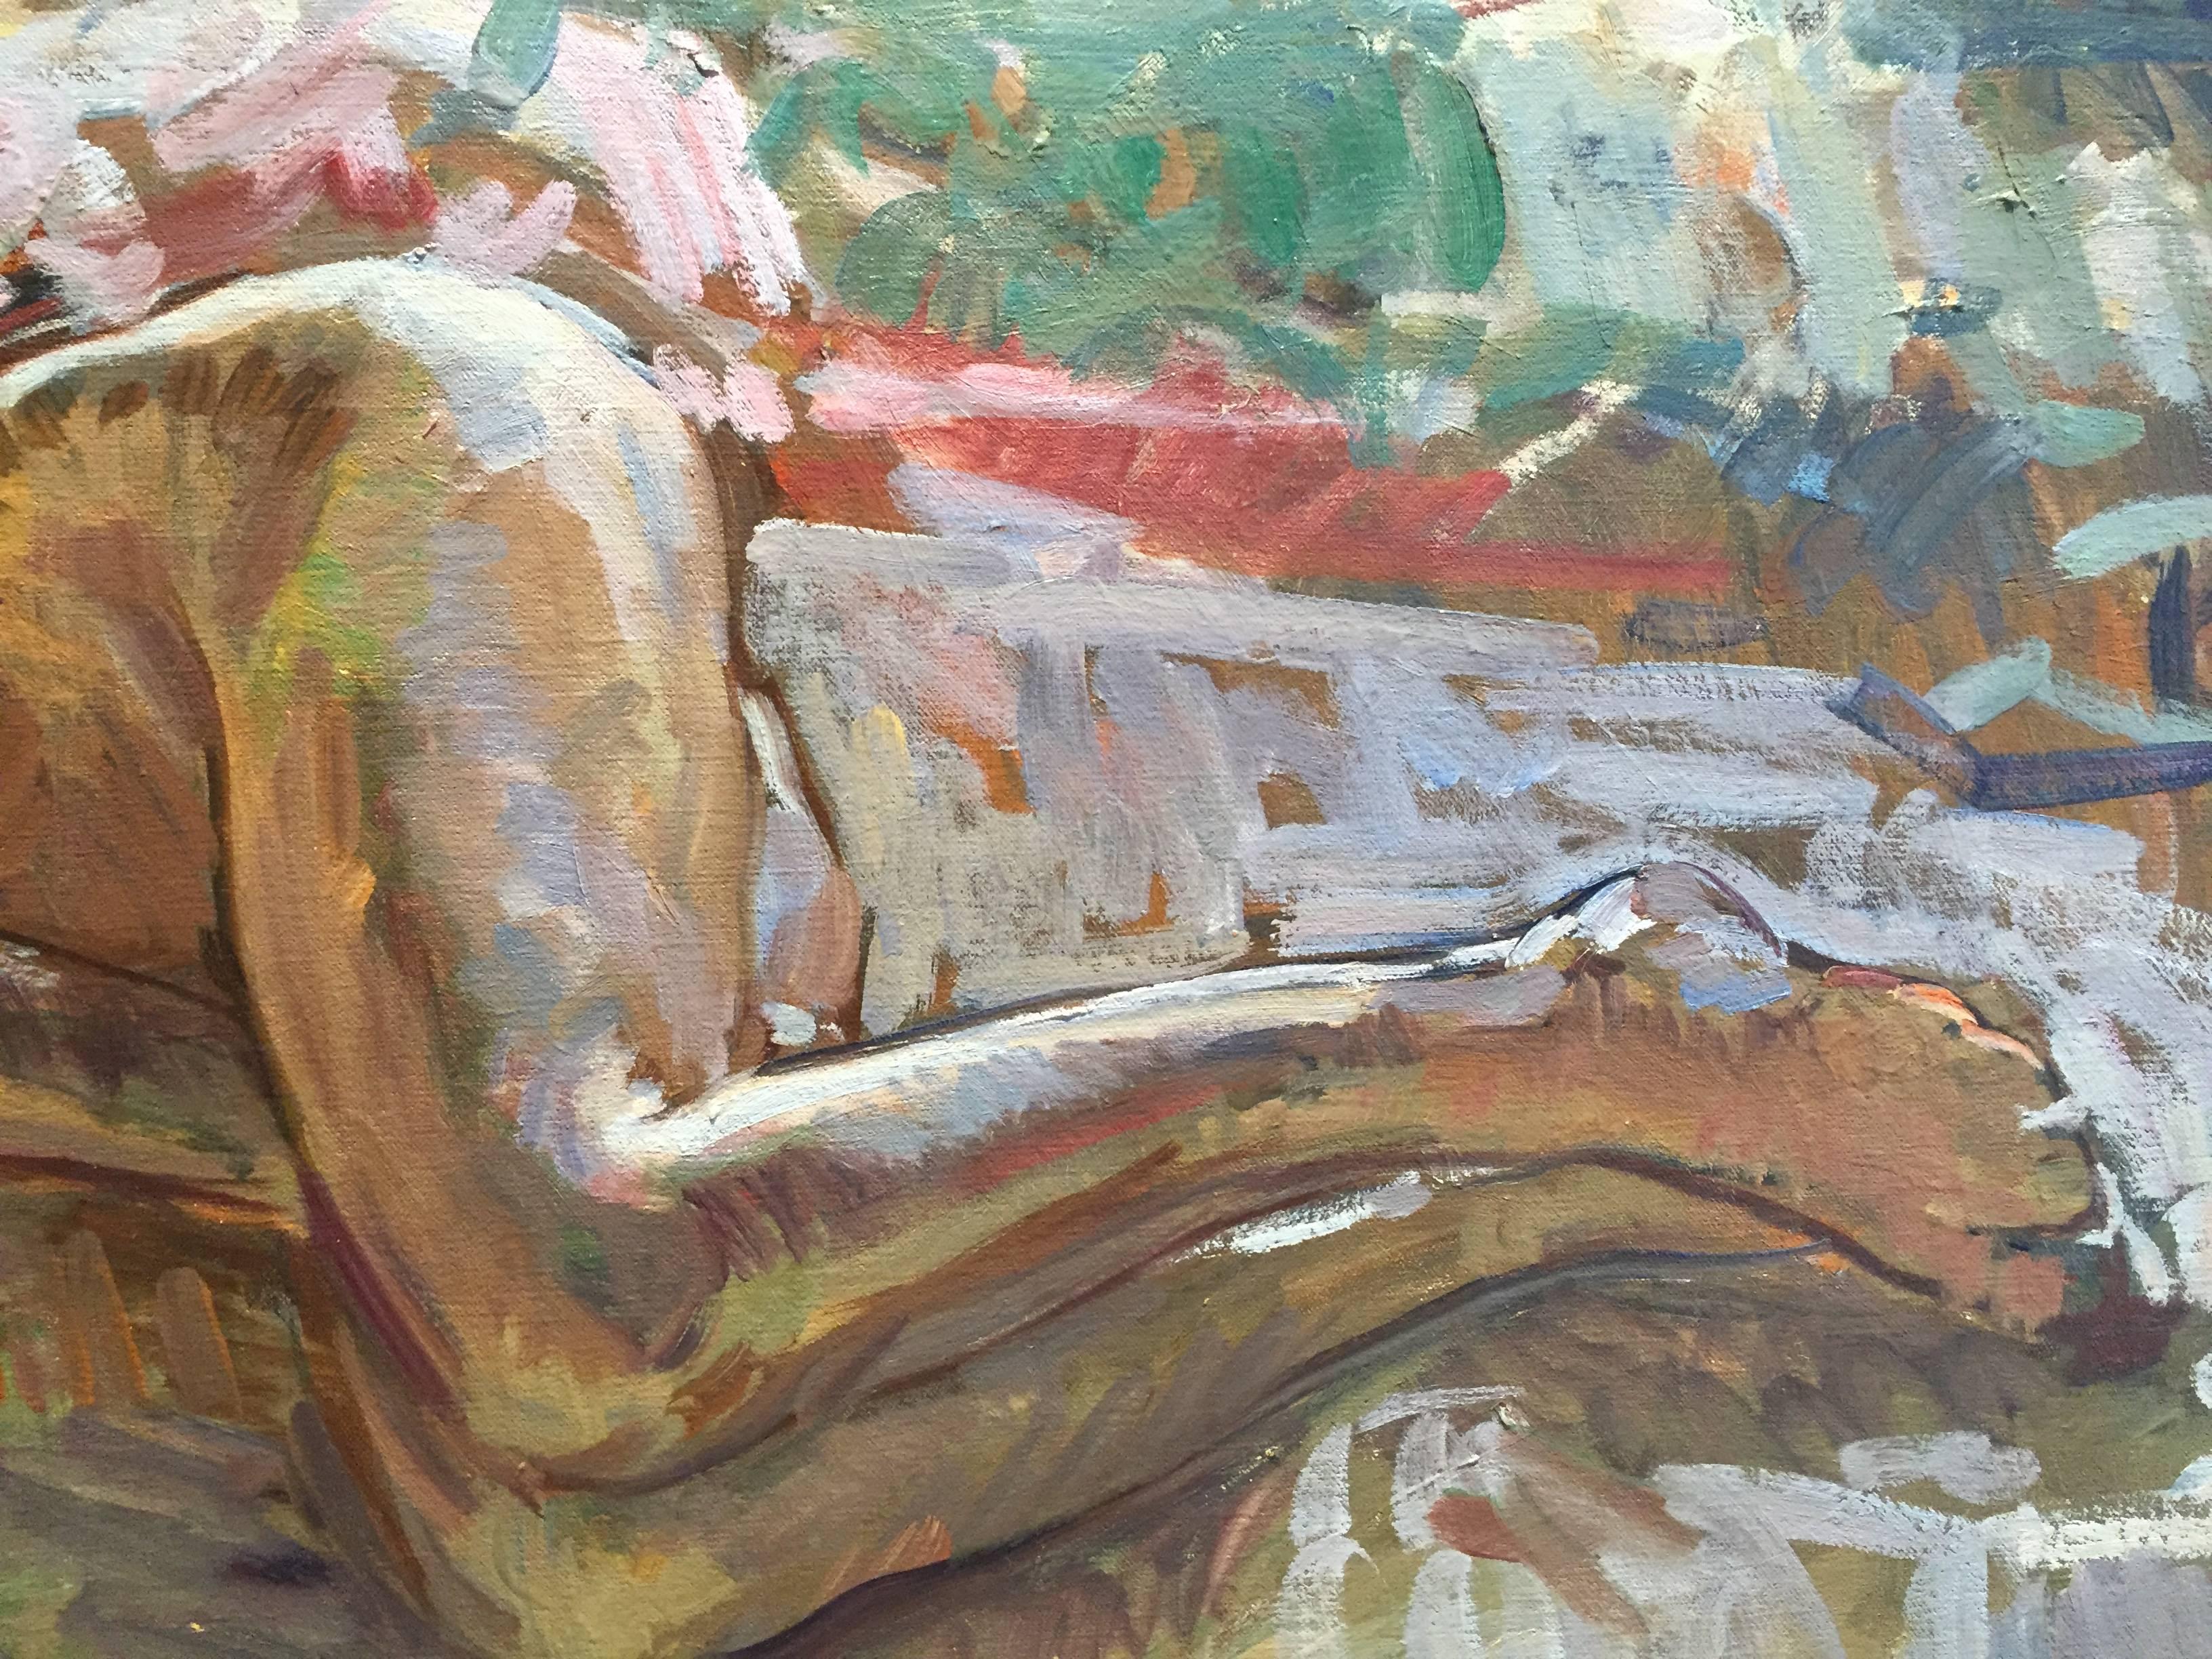 An oil painting of a nude woman, sleeping cozily in the daytime. A nude figure sleeps curled up on a bed adorned with printed textiles. The open window beams light from a bright and sunny day. The window is bordered with printed red drapes. Colors